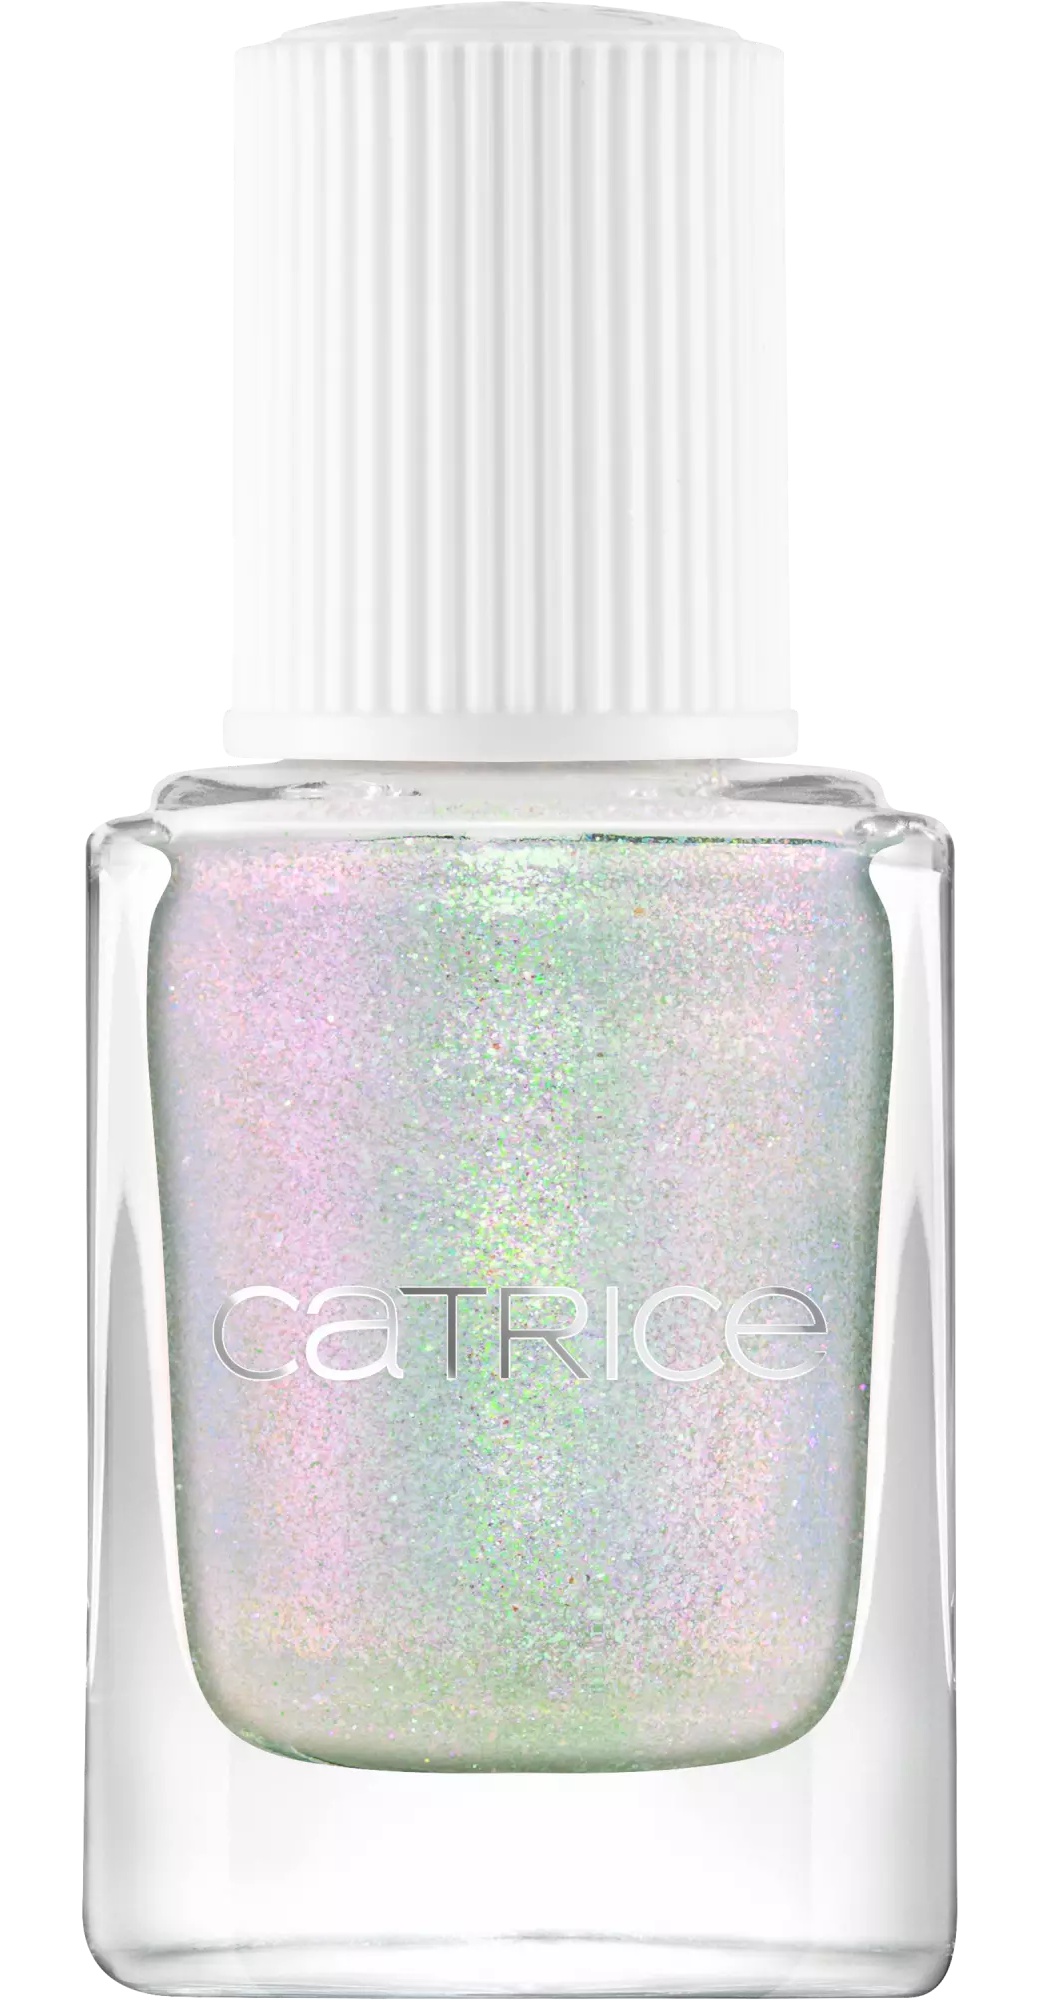 Catrice Metaface Nail Lacquer Cyber Beauty